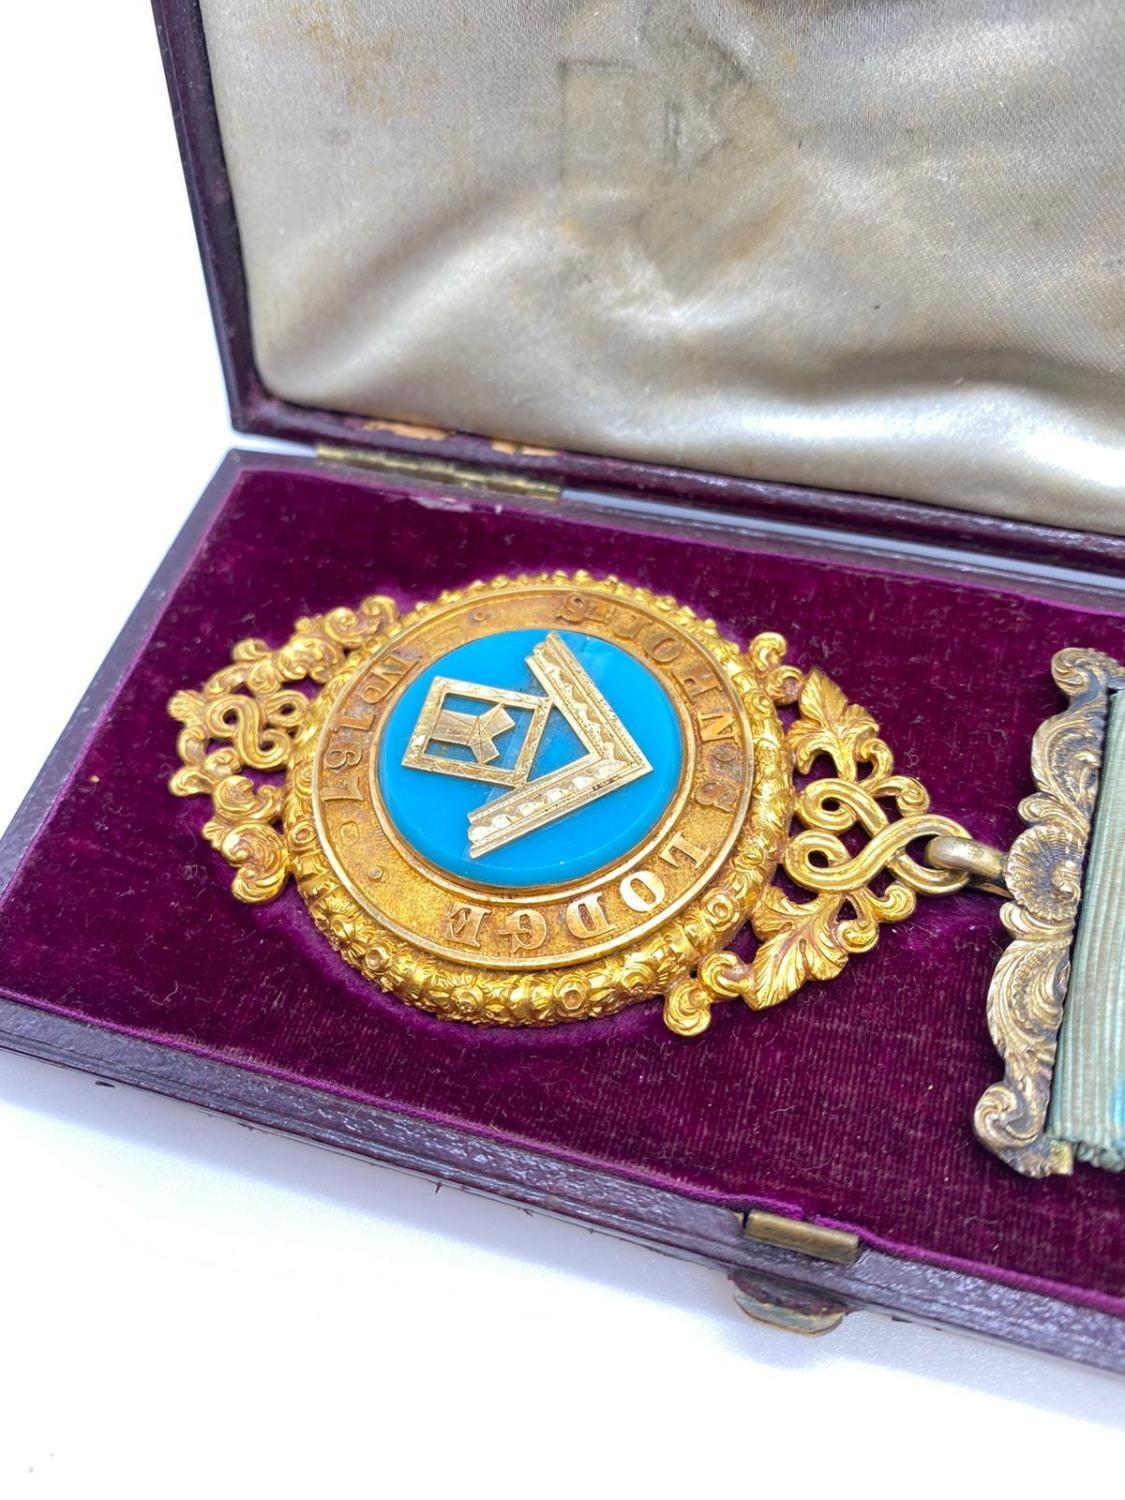 18ct gold Masonic jewel dated 1865 from the St's John lodge Hampstead number 167, weight 62.3g total